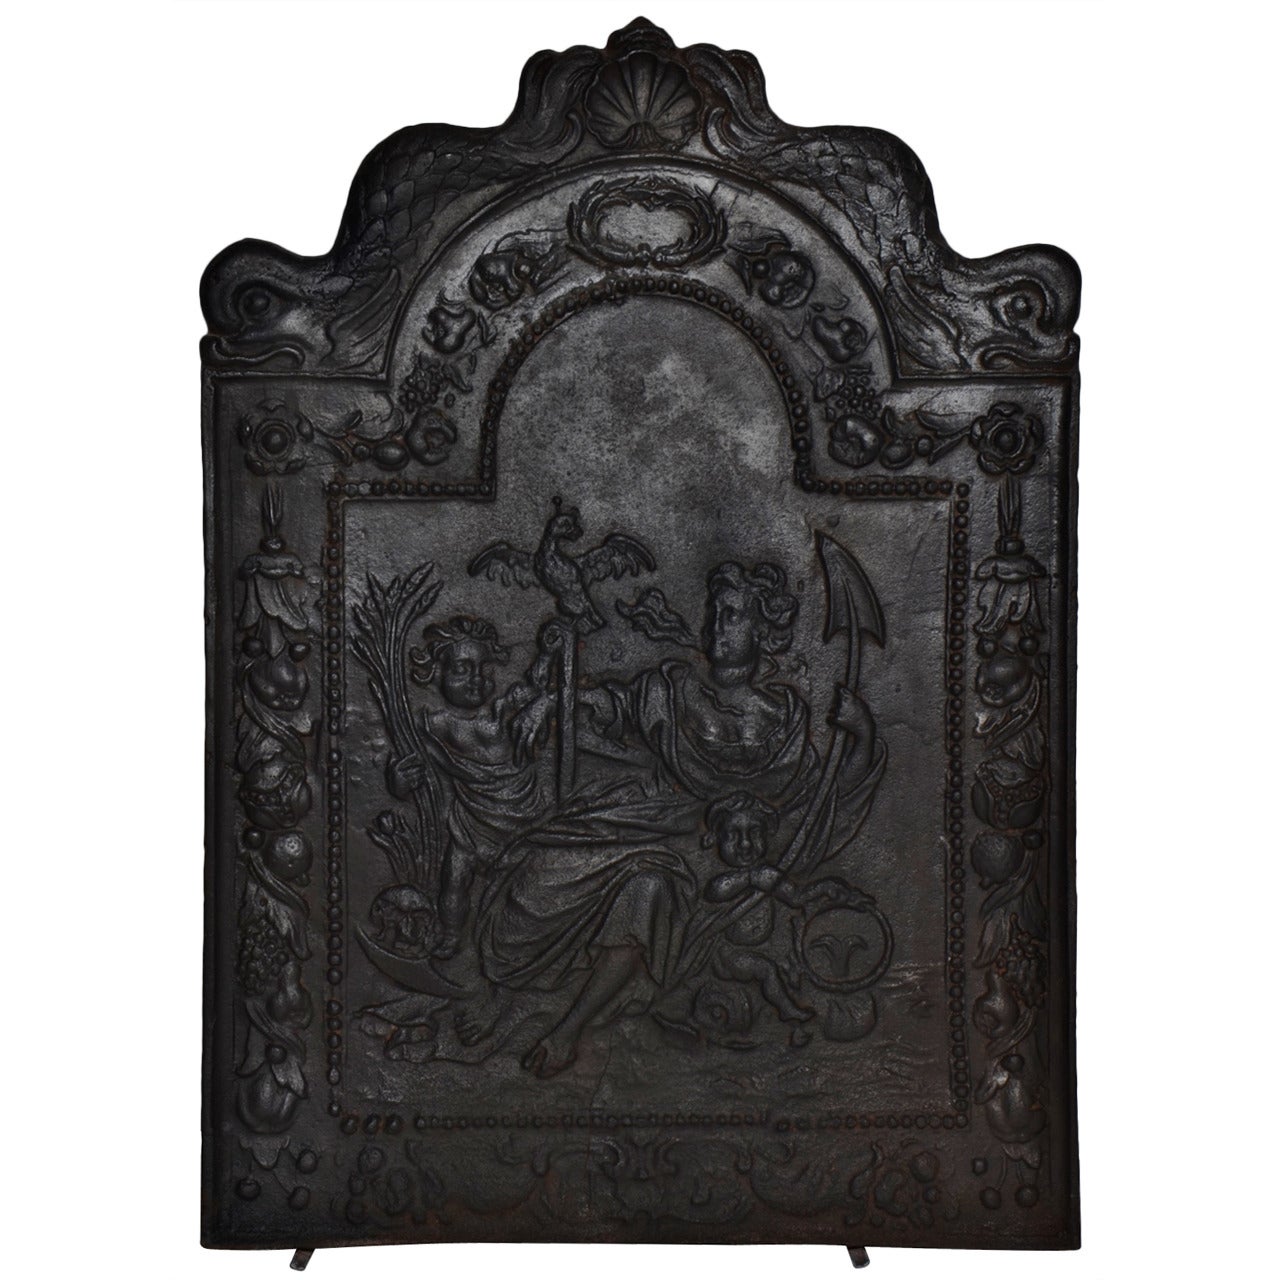 17th c. Antique Cast Iron Fireback Displaying "Spes" The Goddess Hope